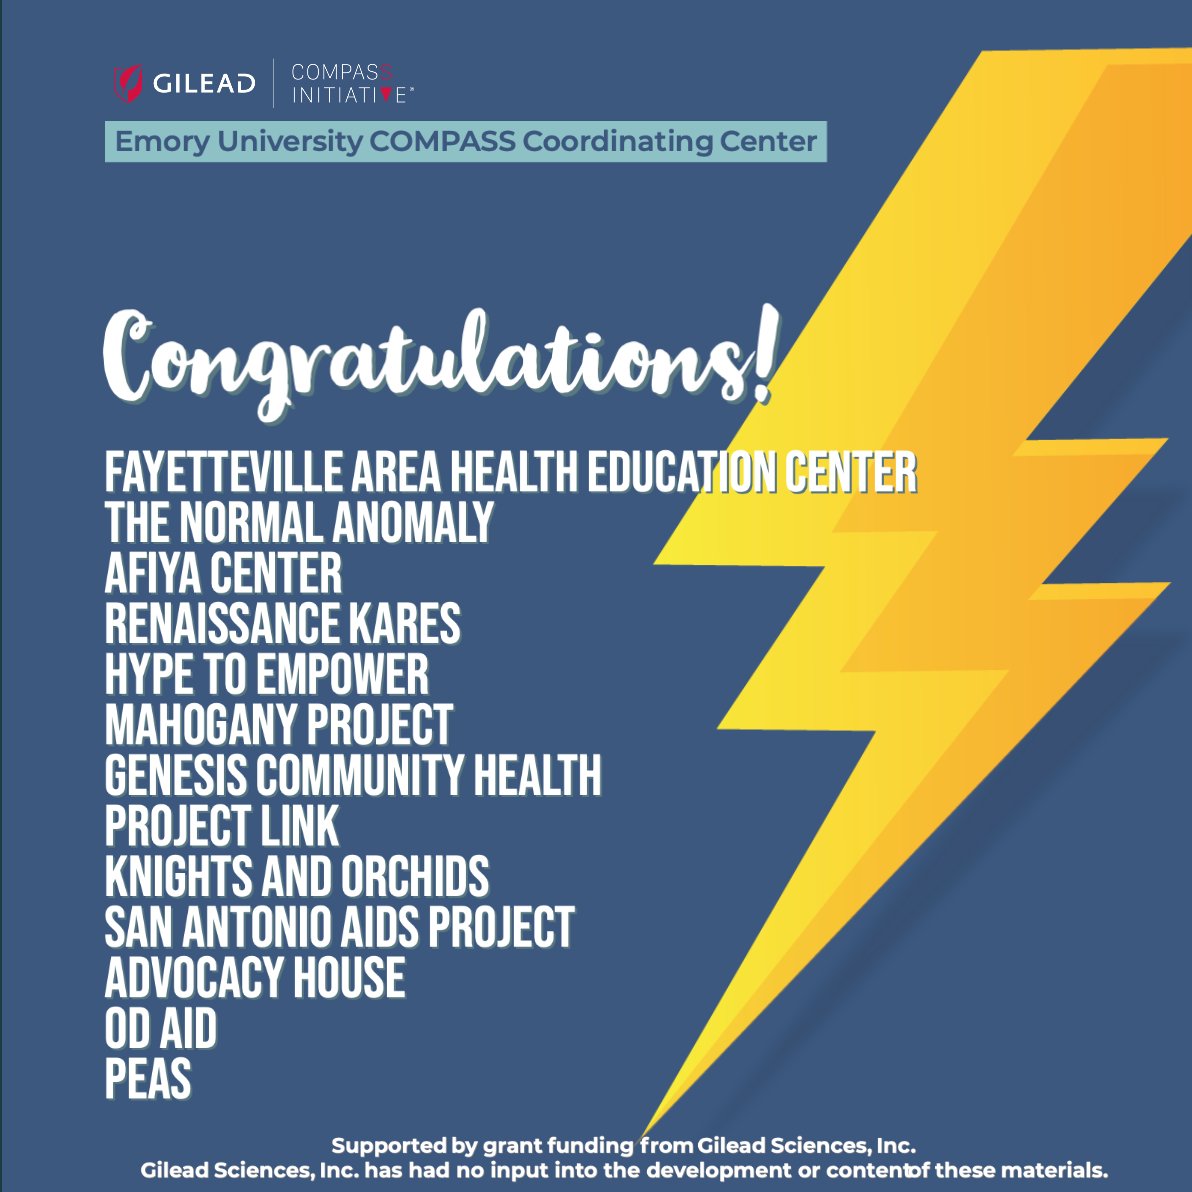 The Emory University COMPASS Coordinating Center is proud to announce our @gileadsciences COMPASS Initiative PoWER Grant Writing Seminar cohort. Join us in congratulating these amazing orgs! 

@DaNormalAnomaly @MahoganyProject @hype2empower @SRAHEC_NC @SanAntonioAIDS @TheAfiyaCtr